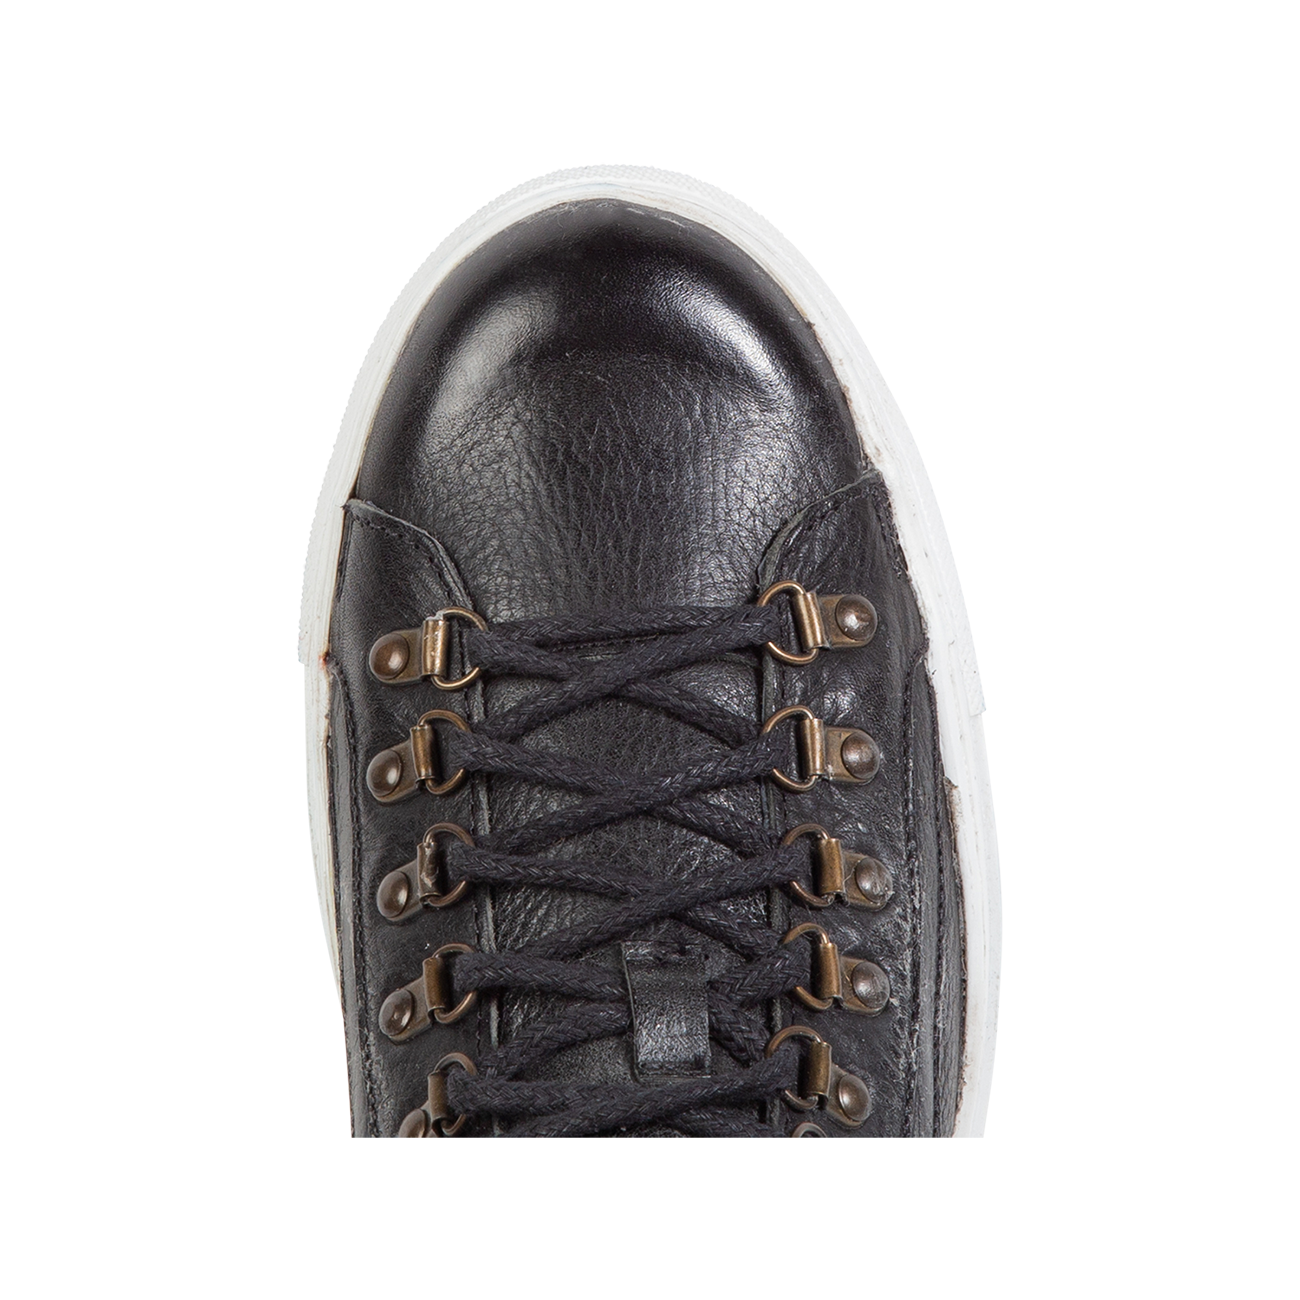 Top view showing round toe and brass rivets on FREEBIRD men's Shelby black shoe